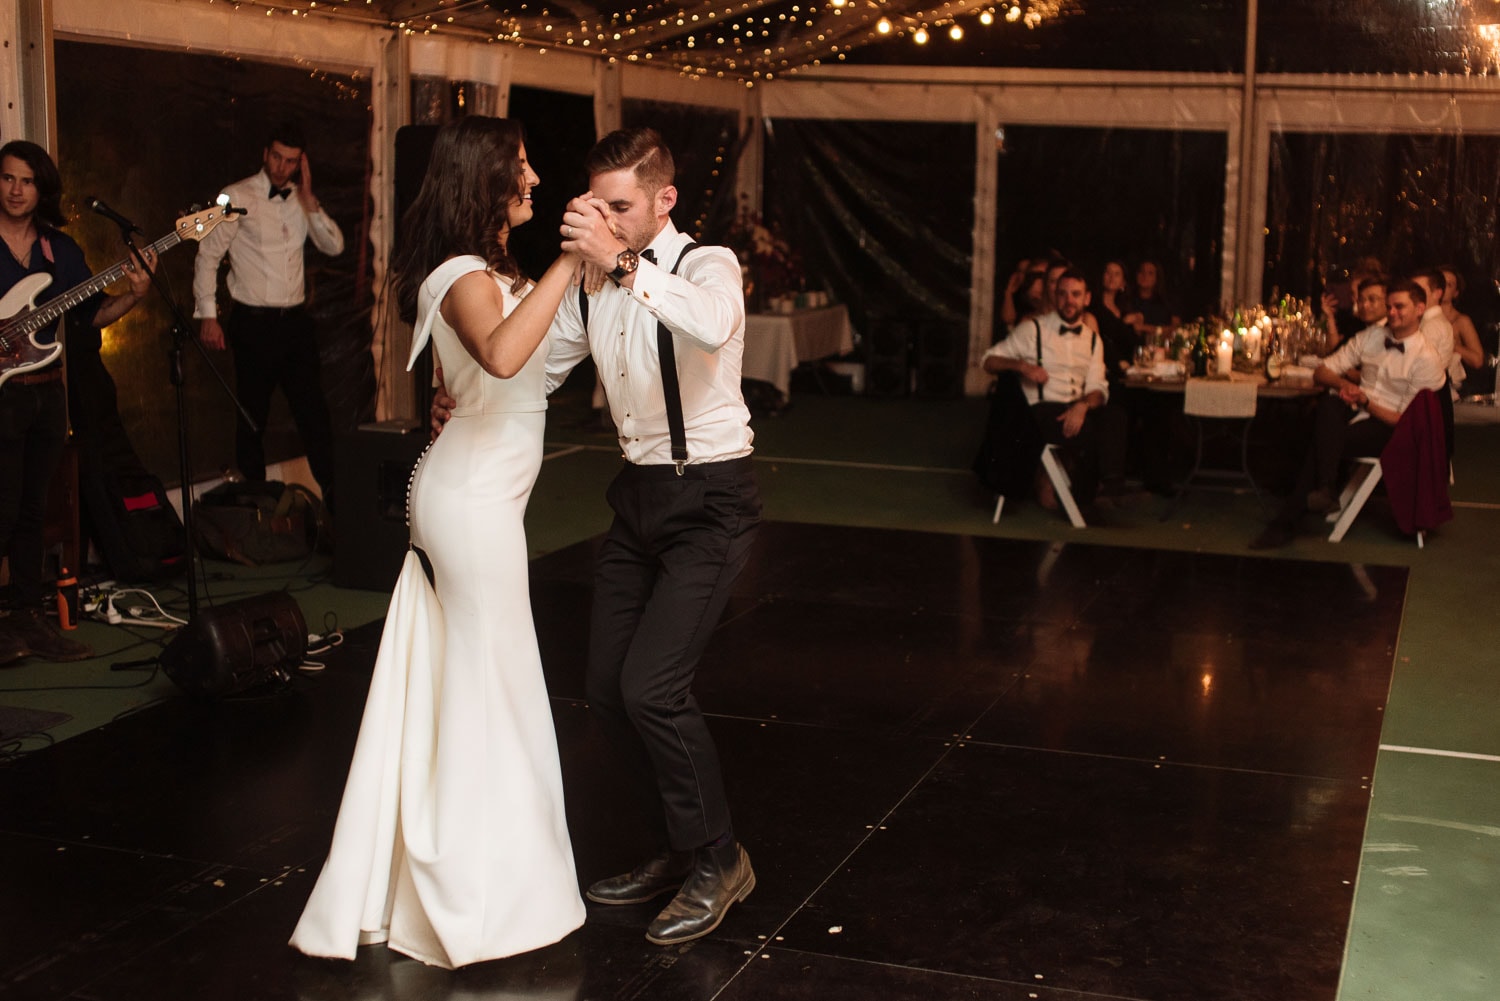 Ally and Archies first dance